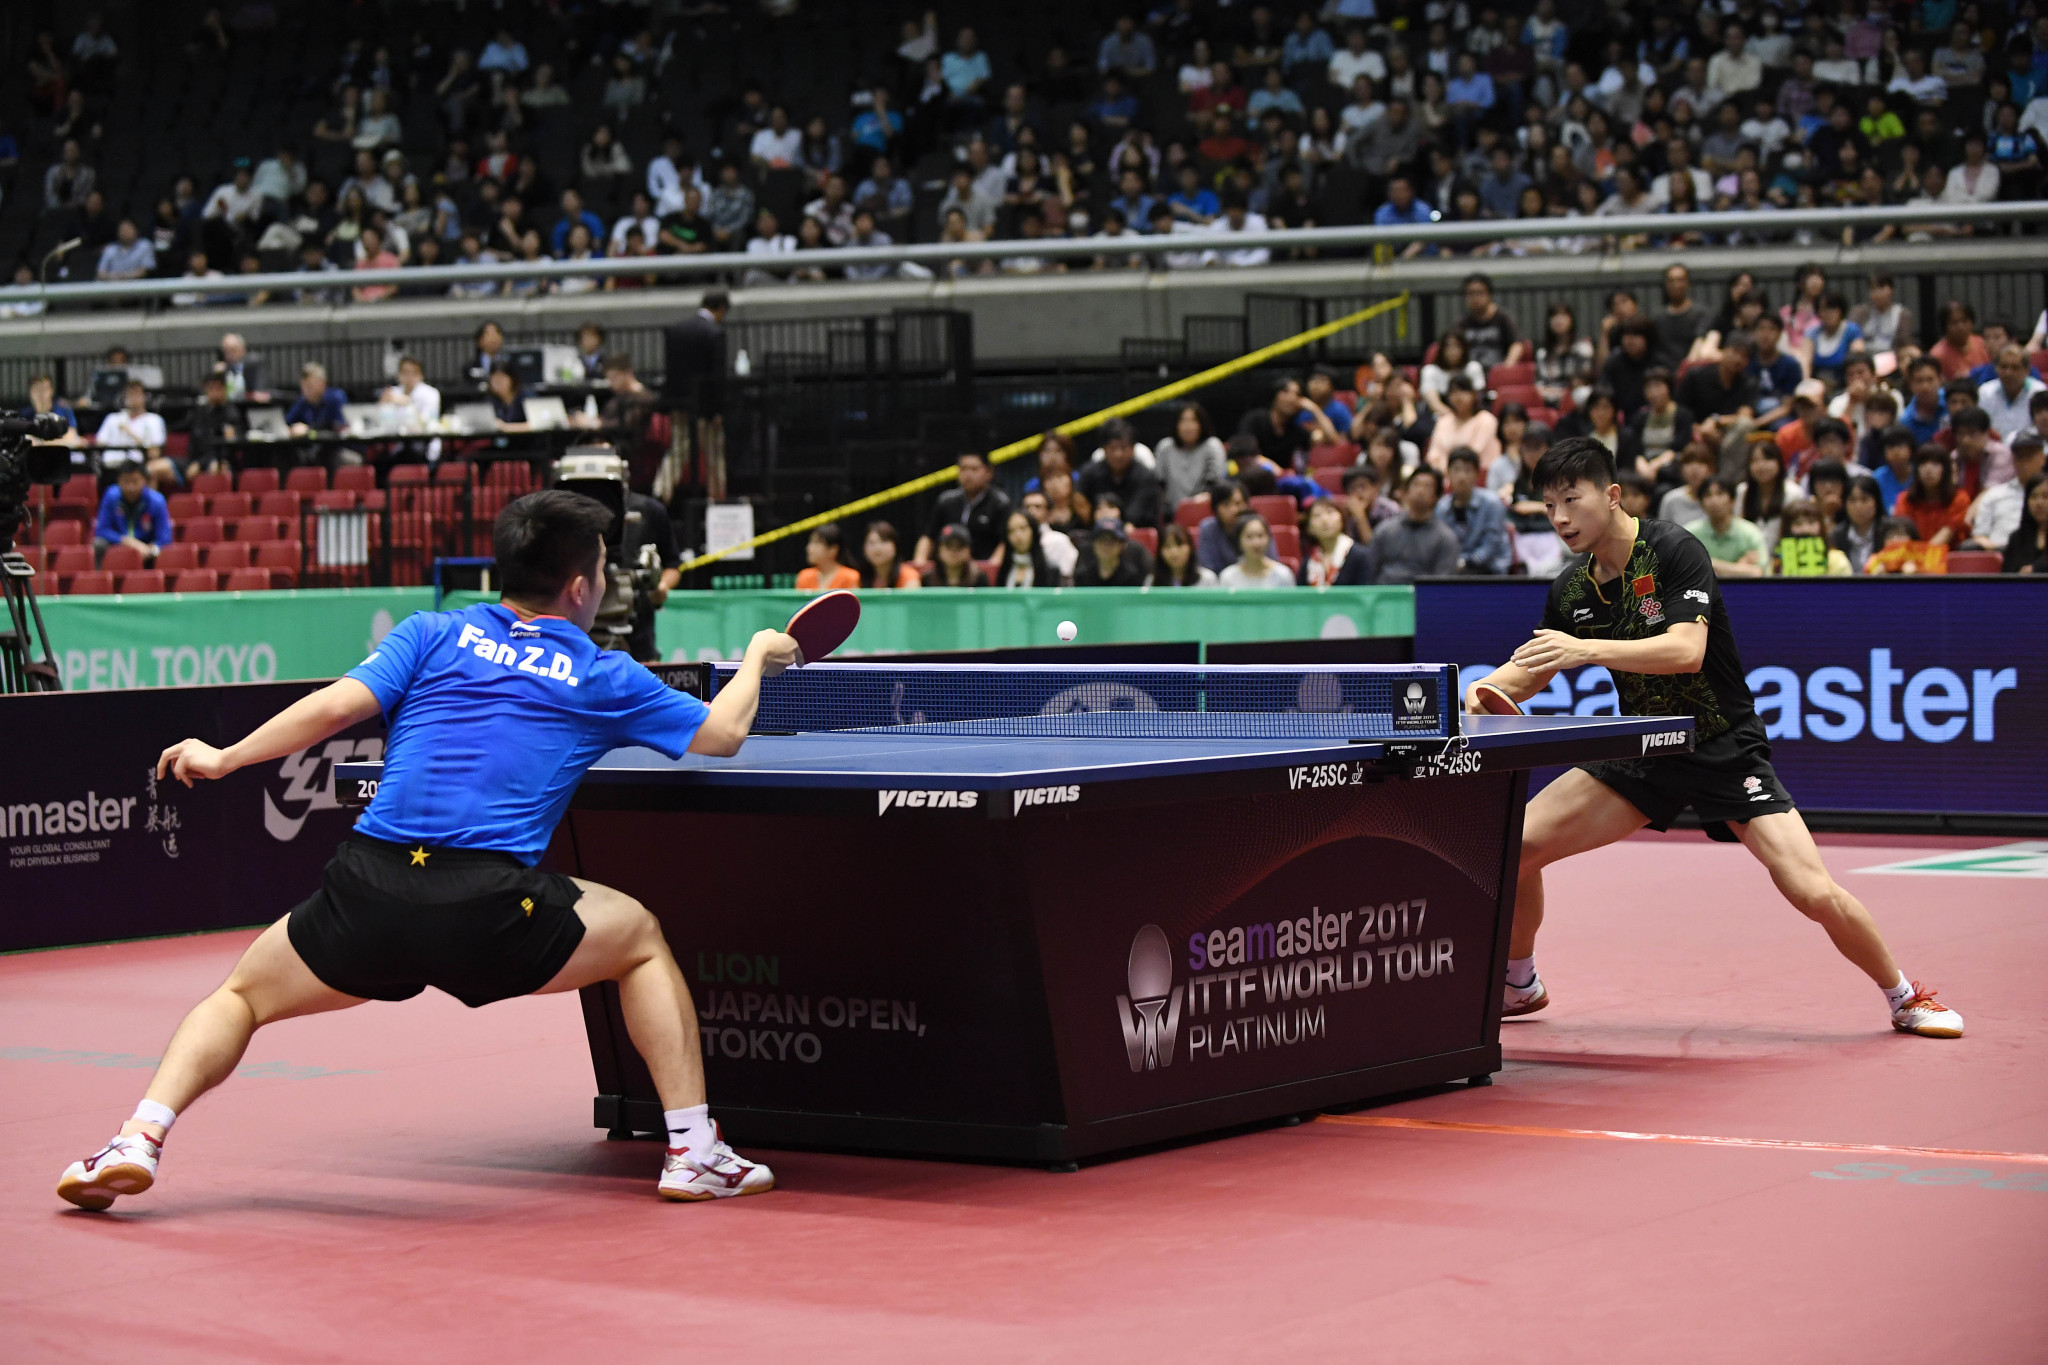 The ITTF World Tour Platinum China Open is set to be rescheduled ©Getty Images